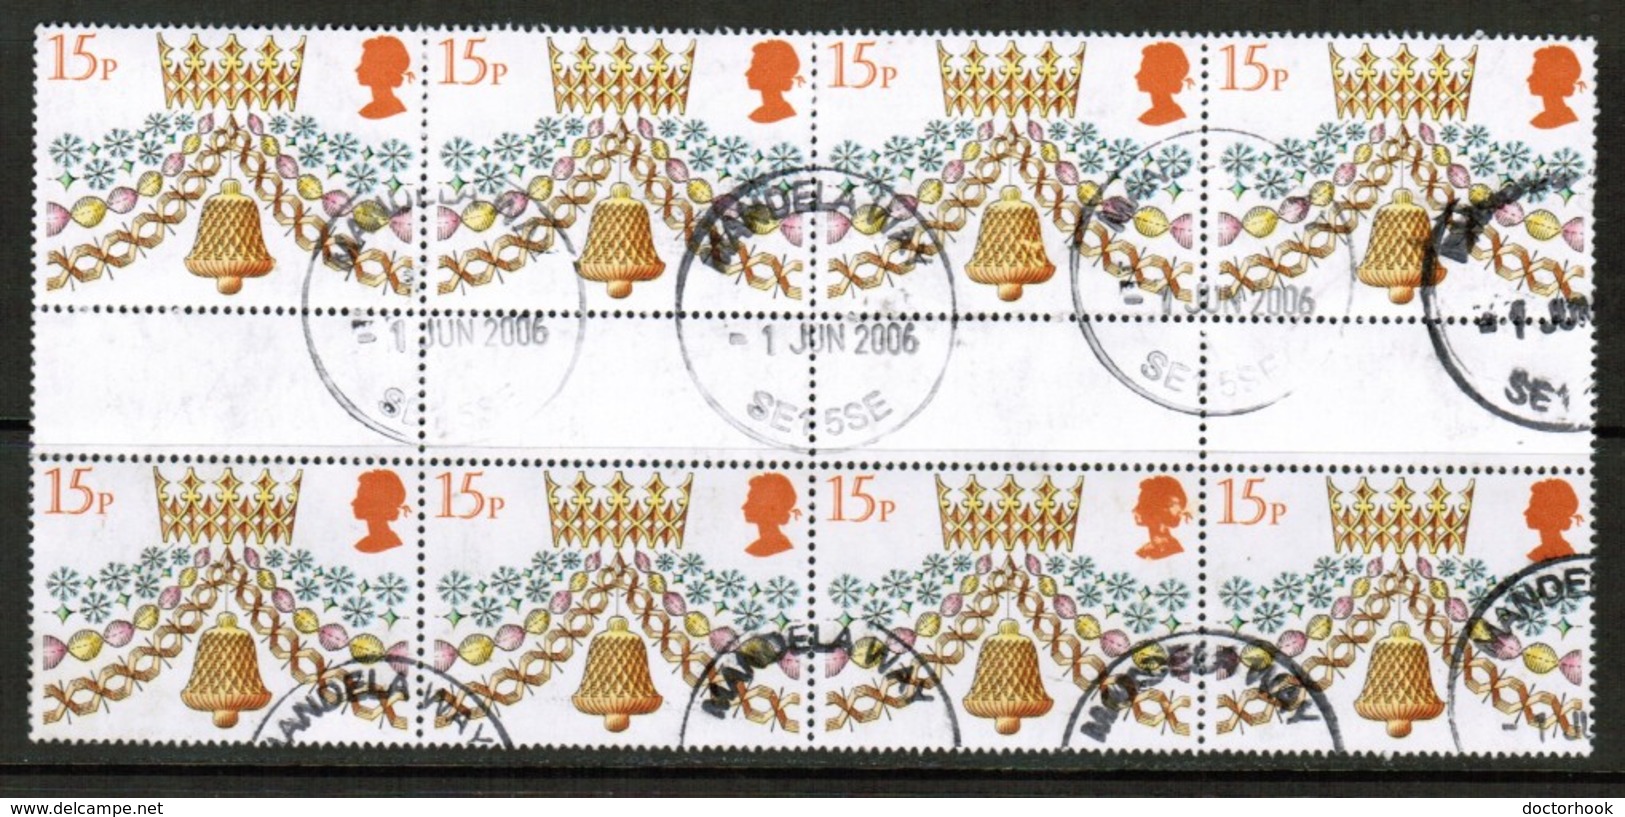 GREAT BRITAIN  Scott # 931 VF USED GUTTER BLOCK Of 8 (LG-1173) - Used Stamps